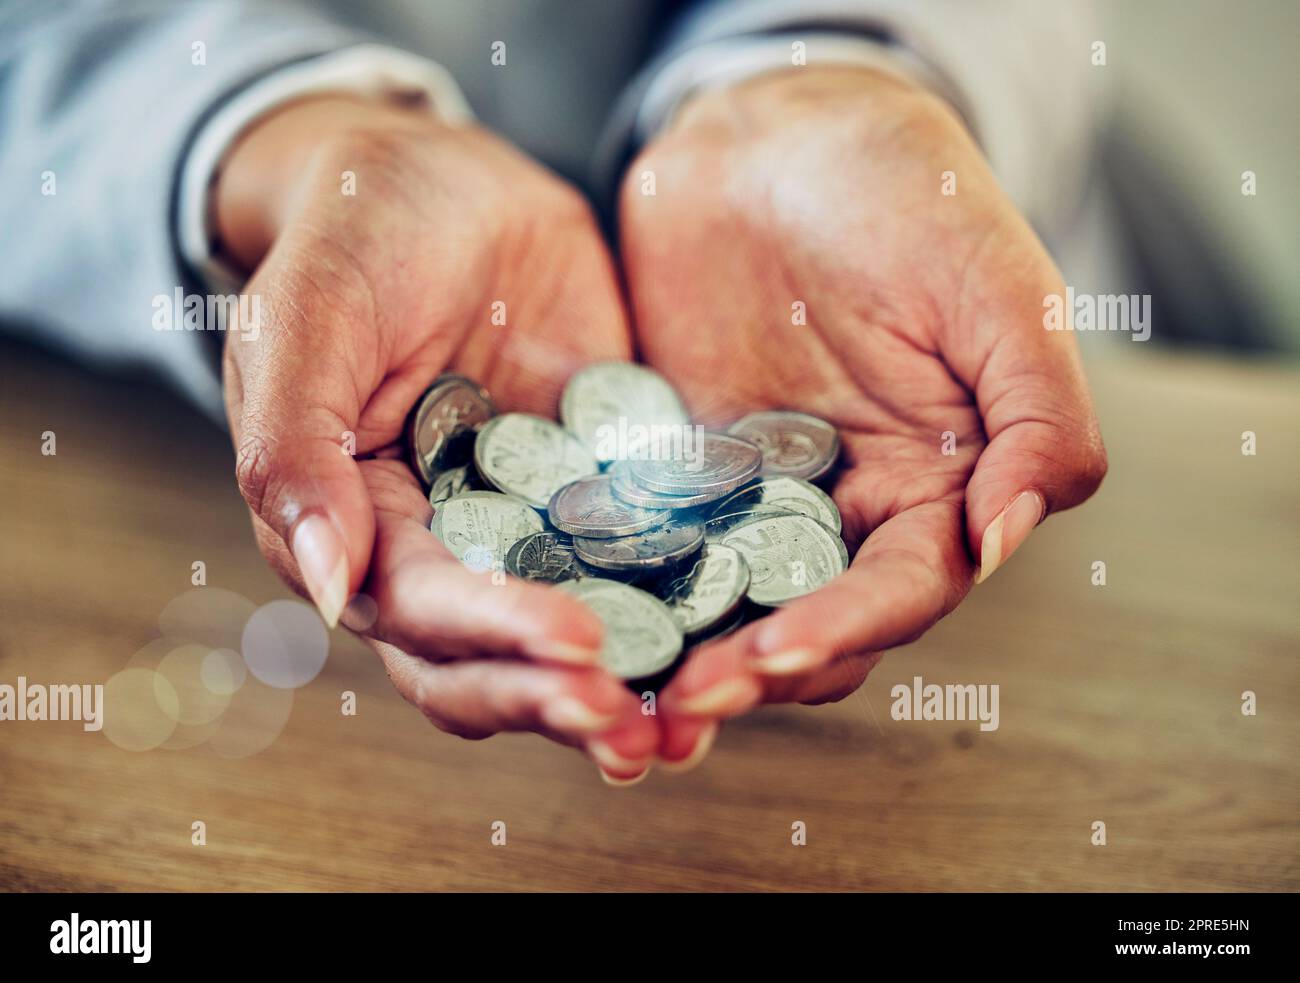 . Money, coins and change of wealthy hands of an investor in business holding finance. Financial, savings or investment for startup growth, accountant planning for future finances, insurance or tax. Stock Photo